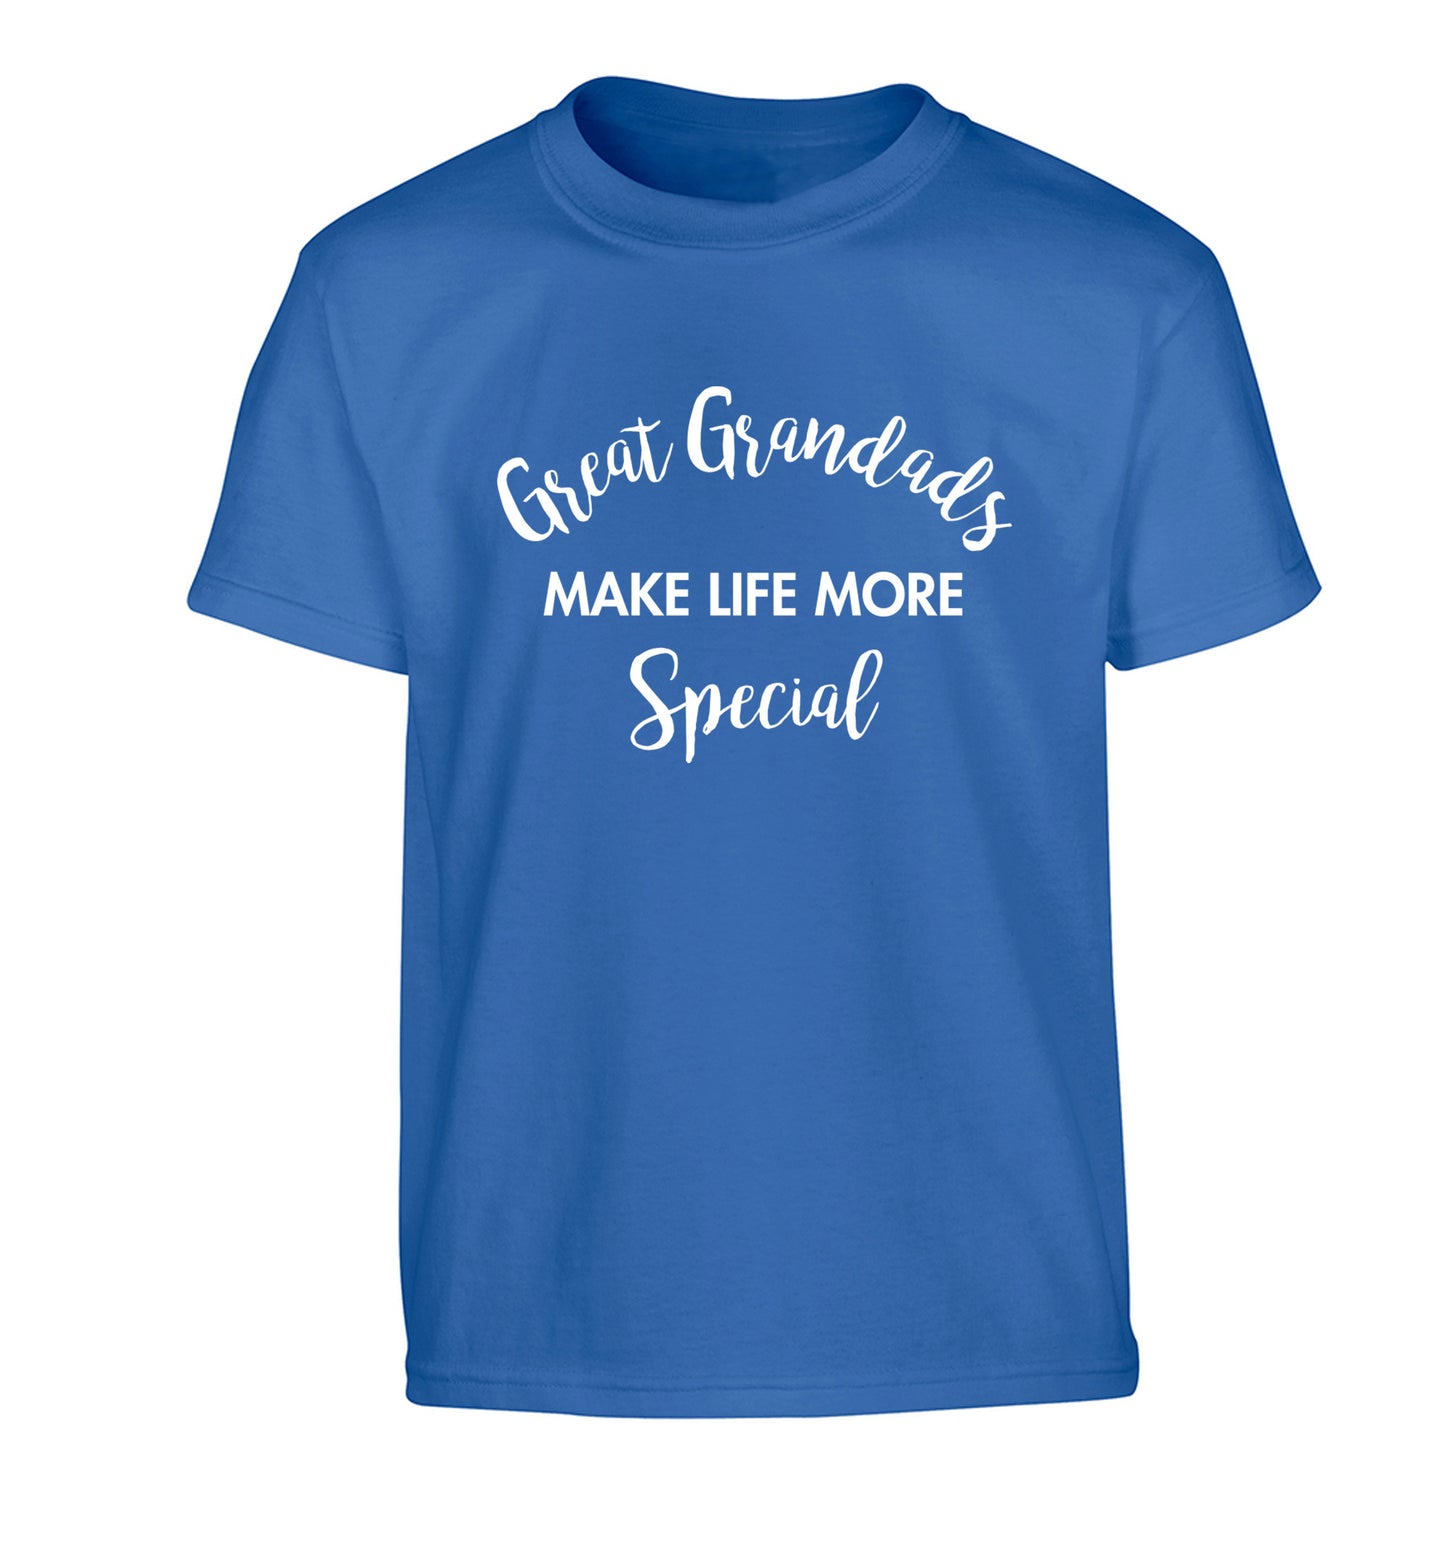 Great Grandads make life more special Children's blue Tshirt 12-14 Years